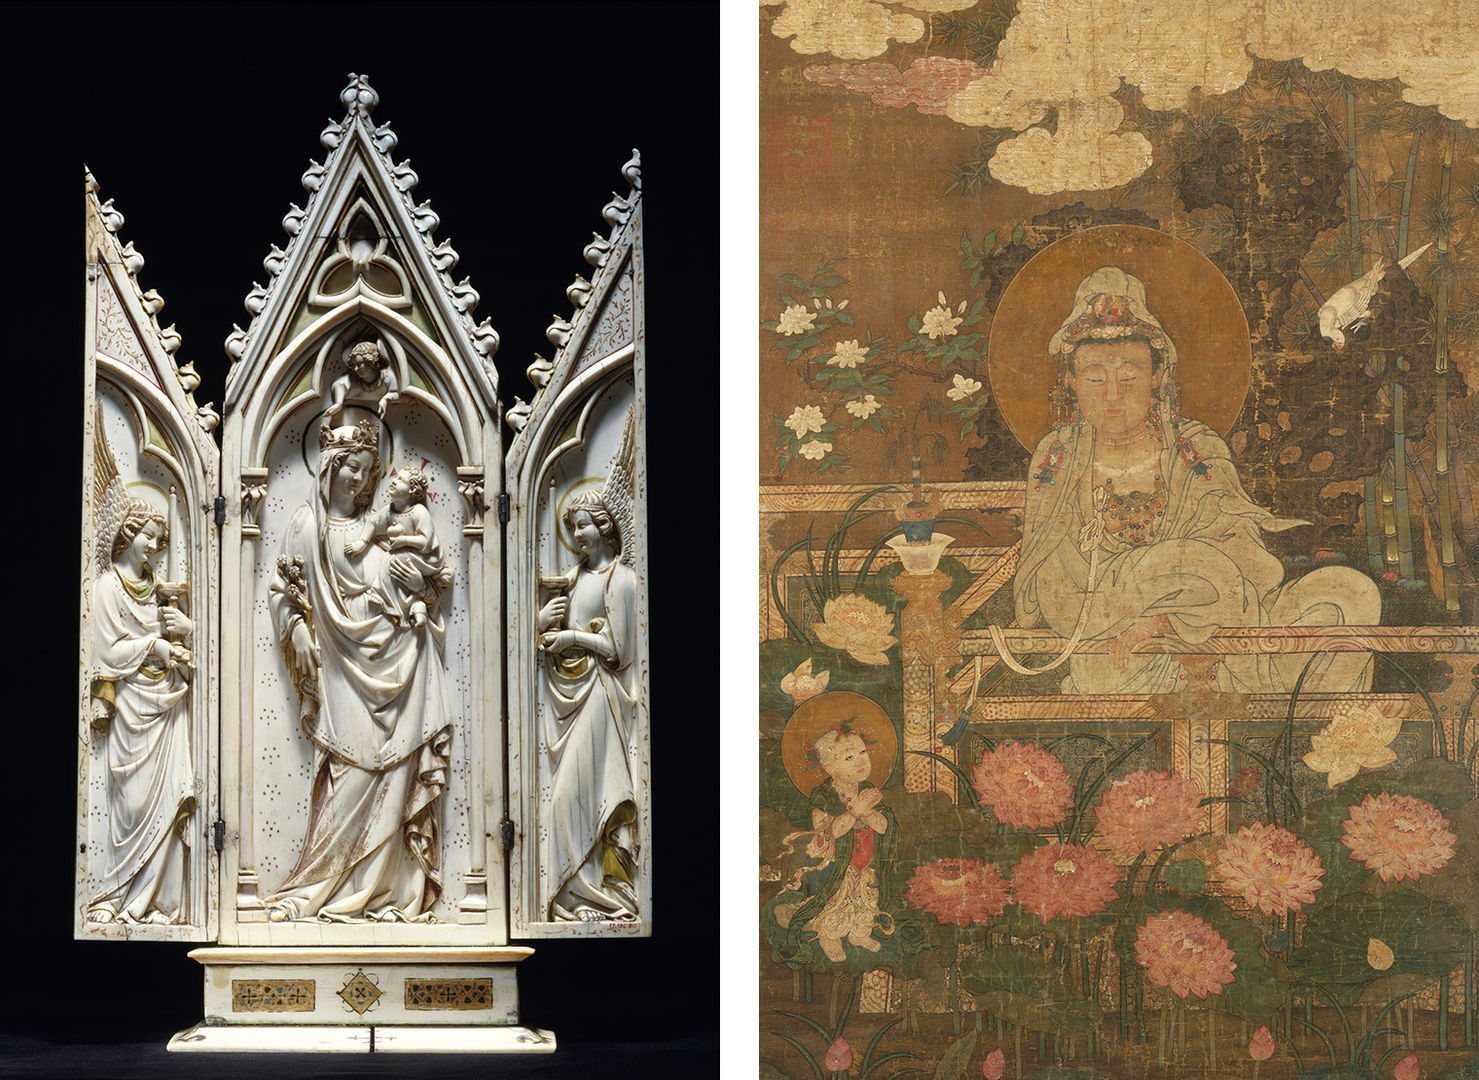 Left: an ornate shrine depicting a mother and child. Right: a tapestry depicting a woman in a garden